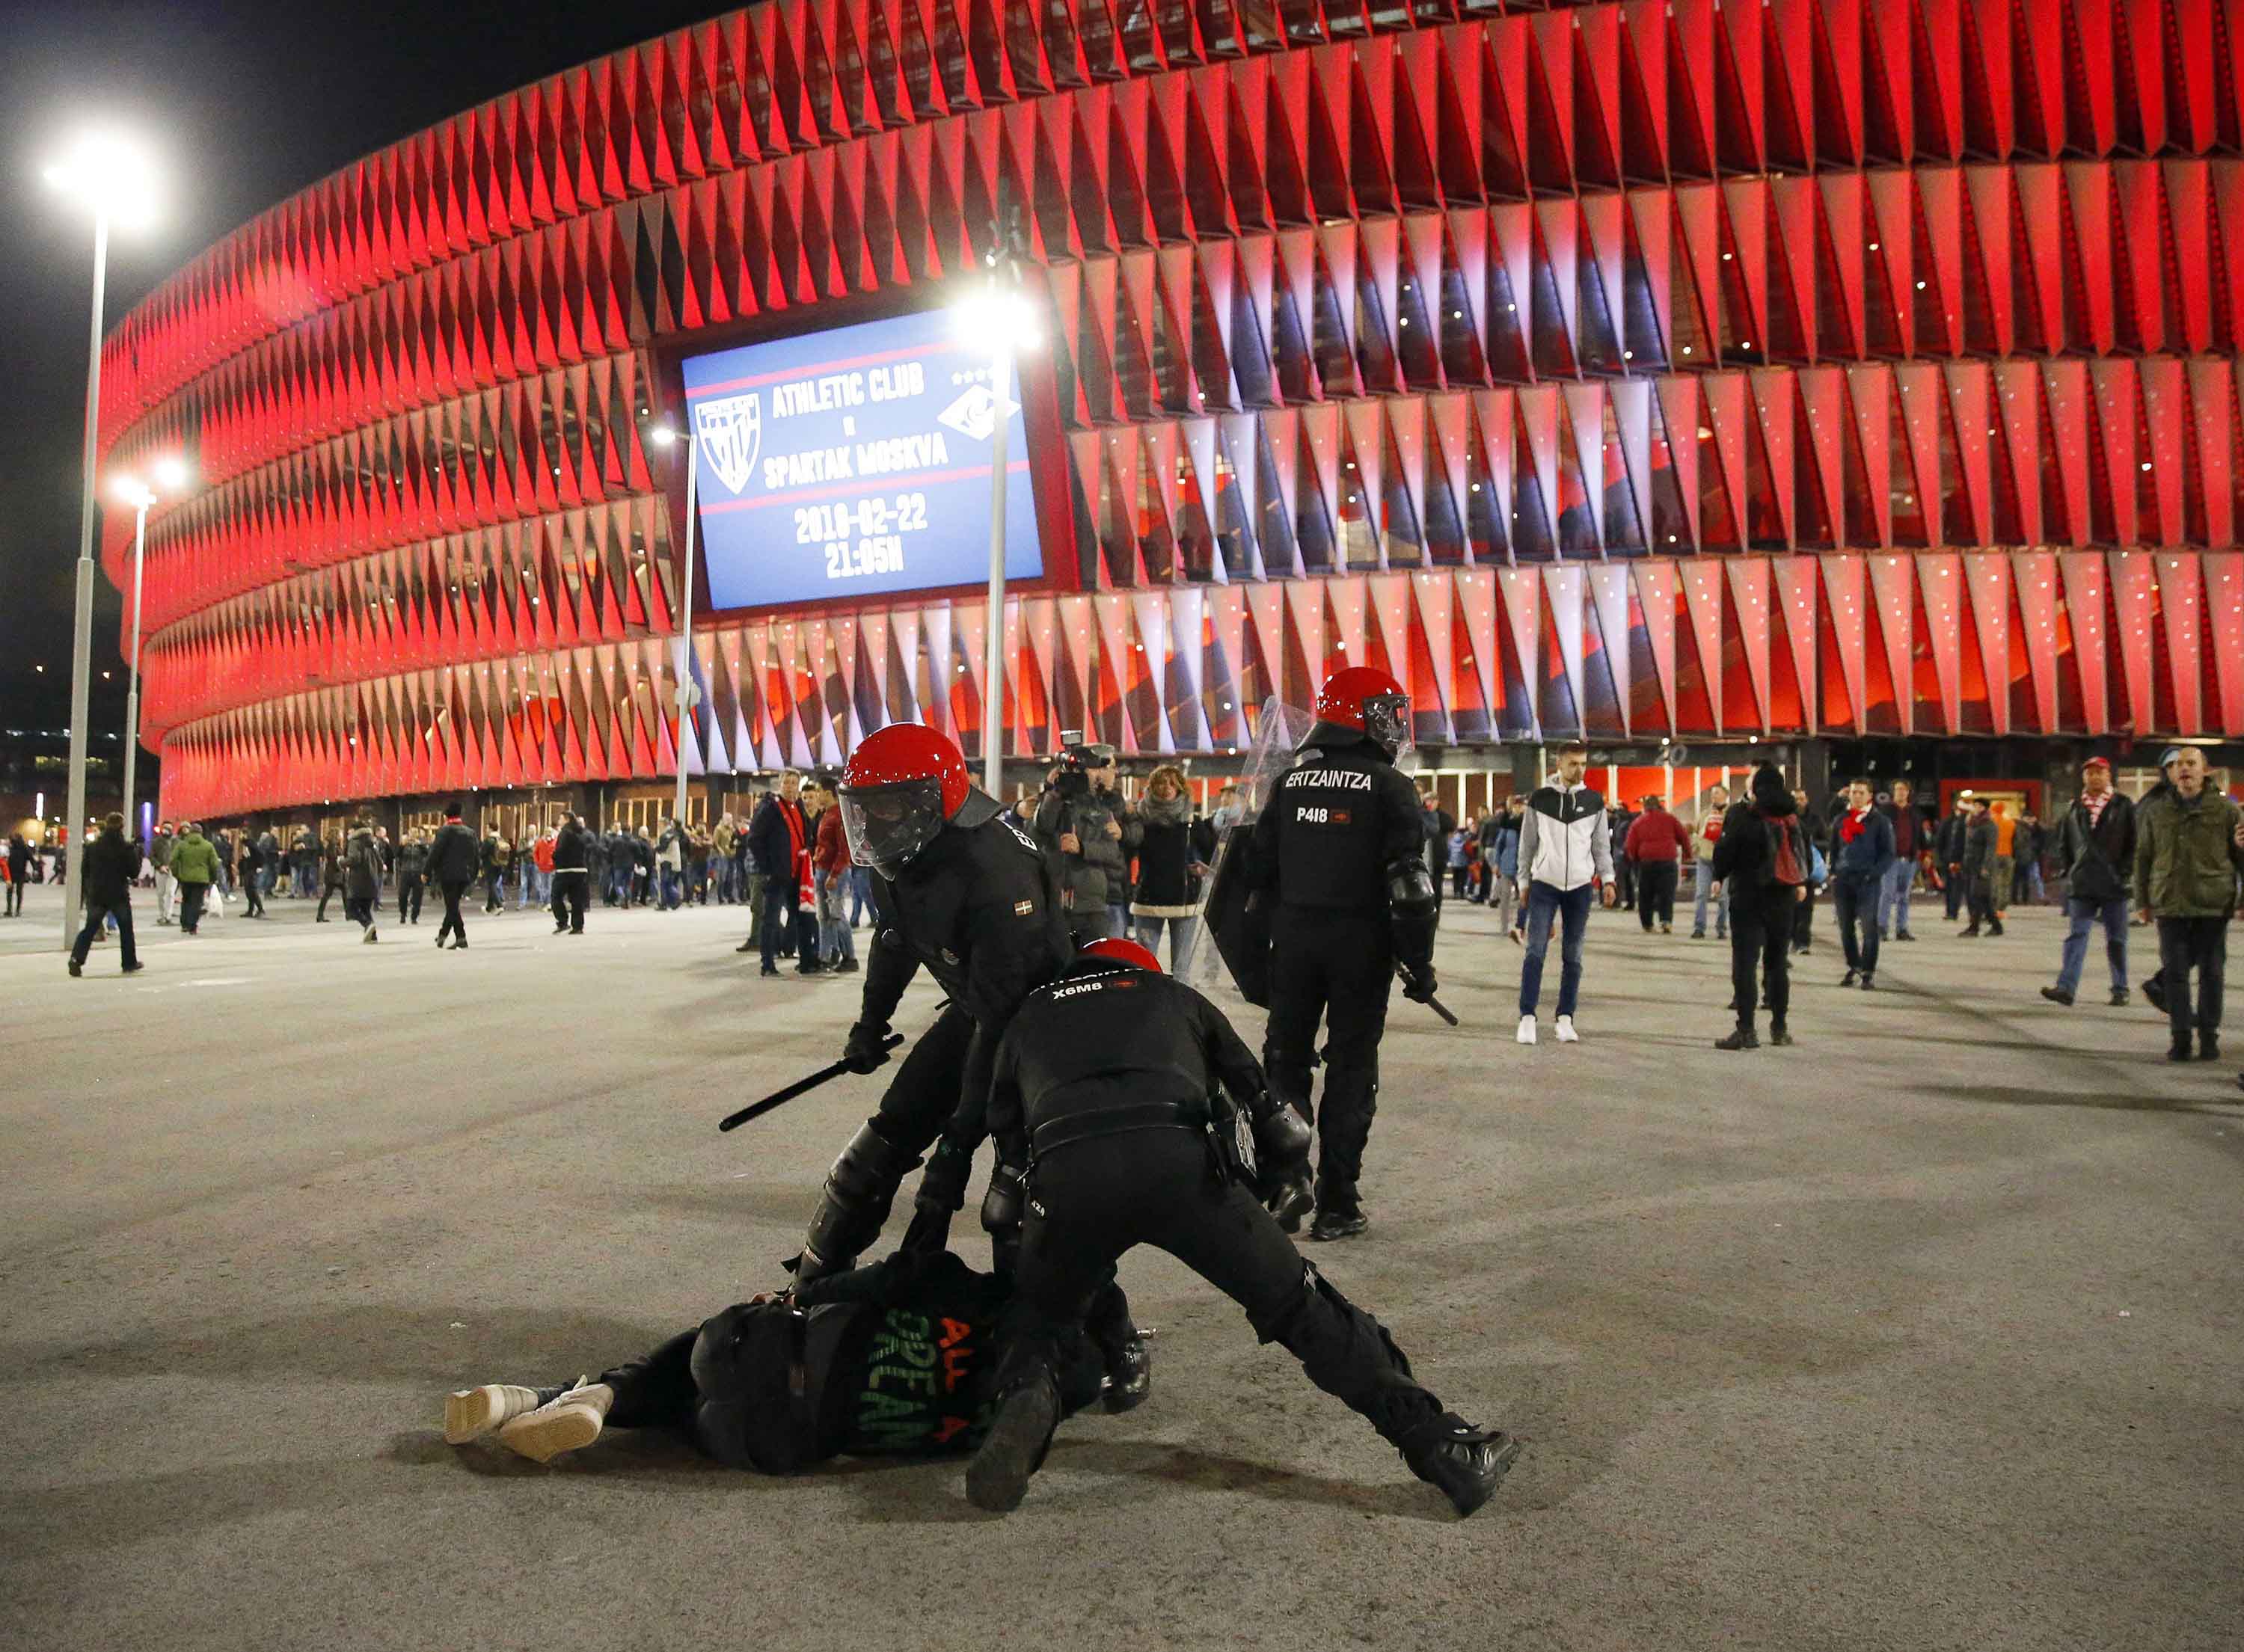 UEFA charges Russian club Spartak Moscow after fans' protest